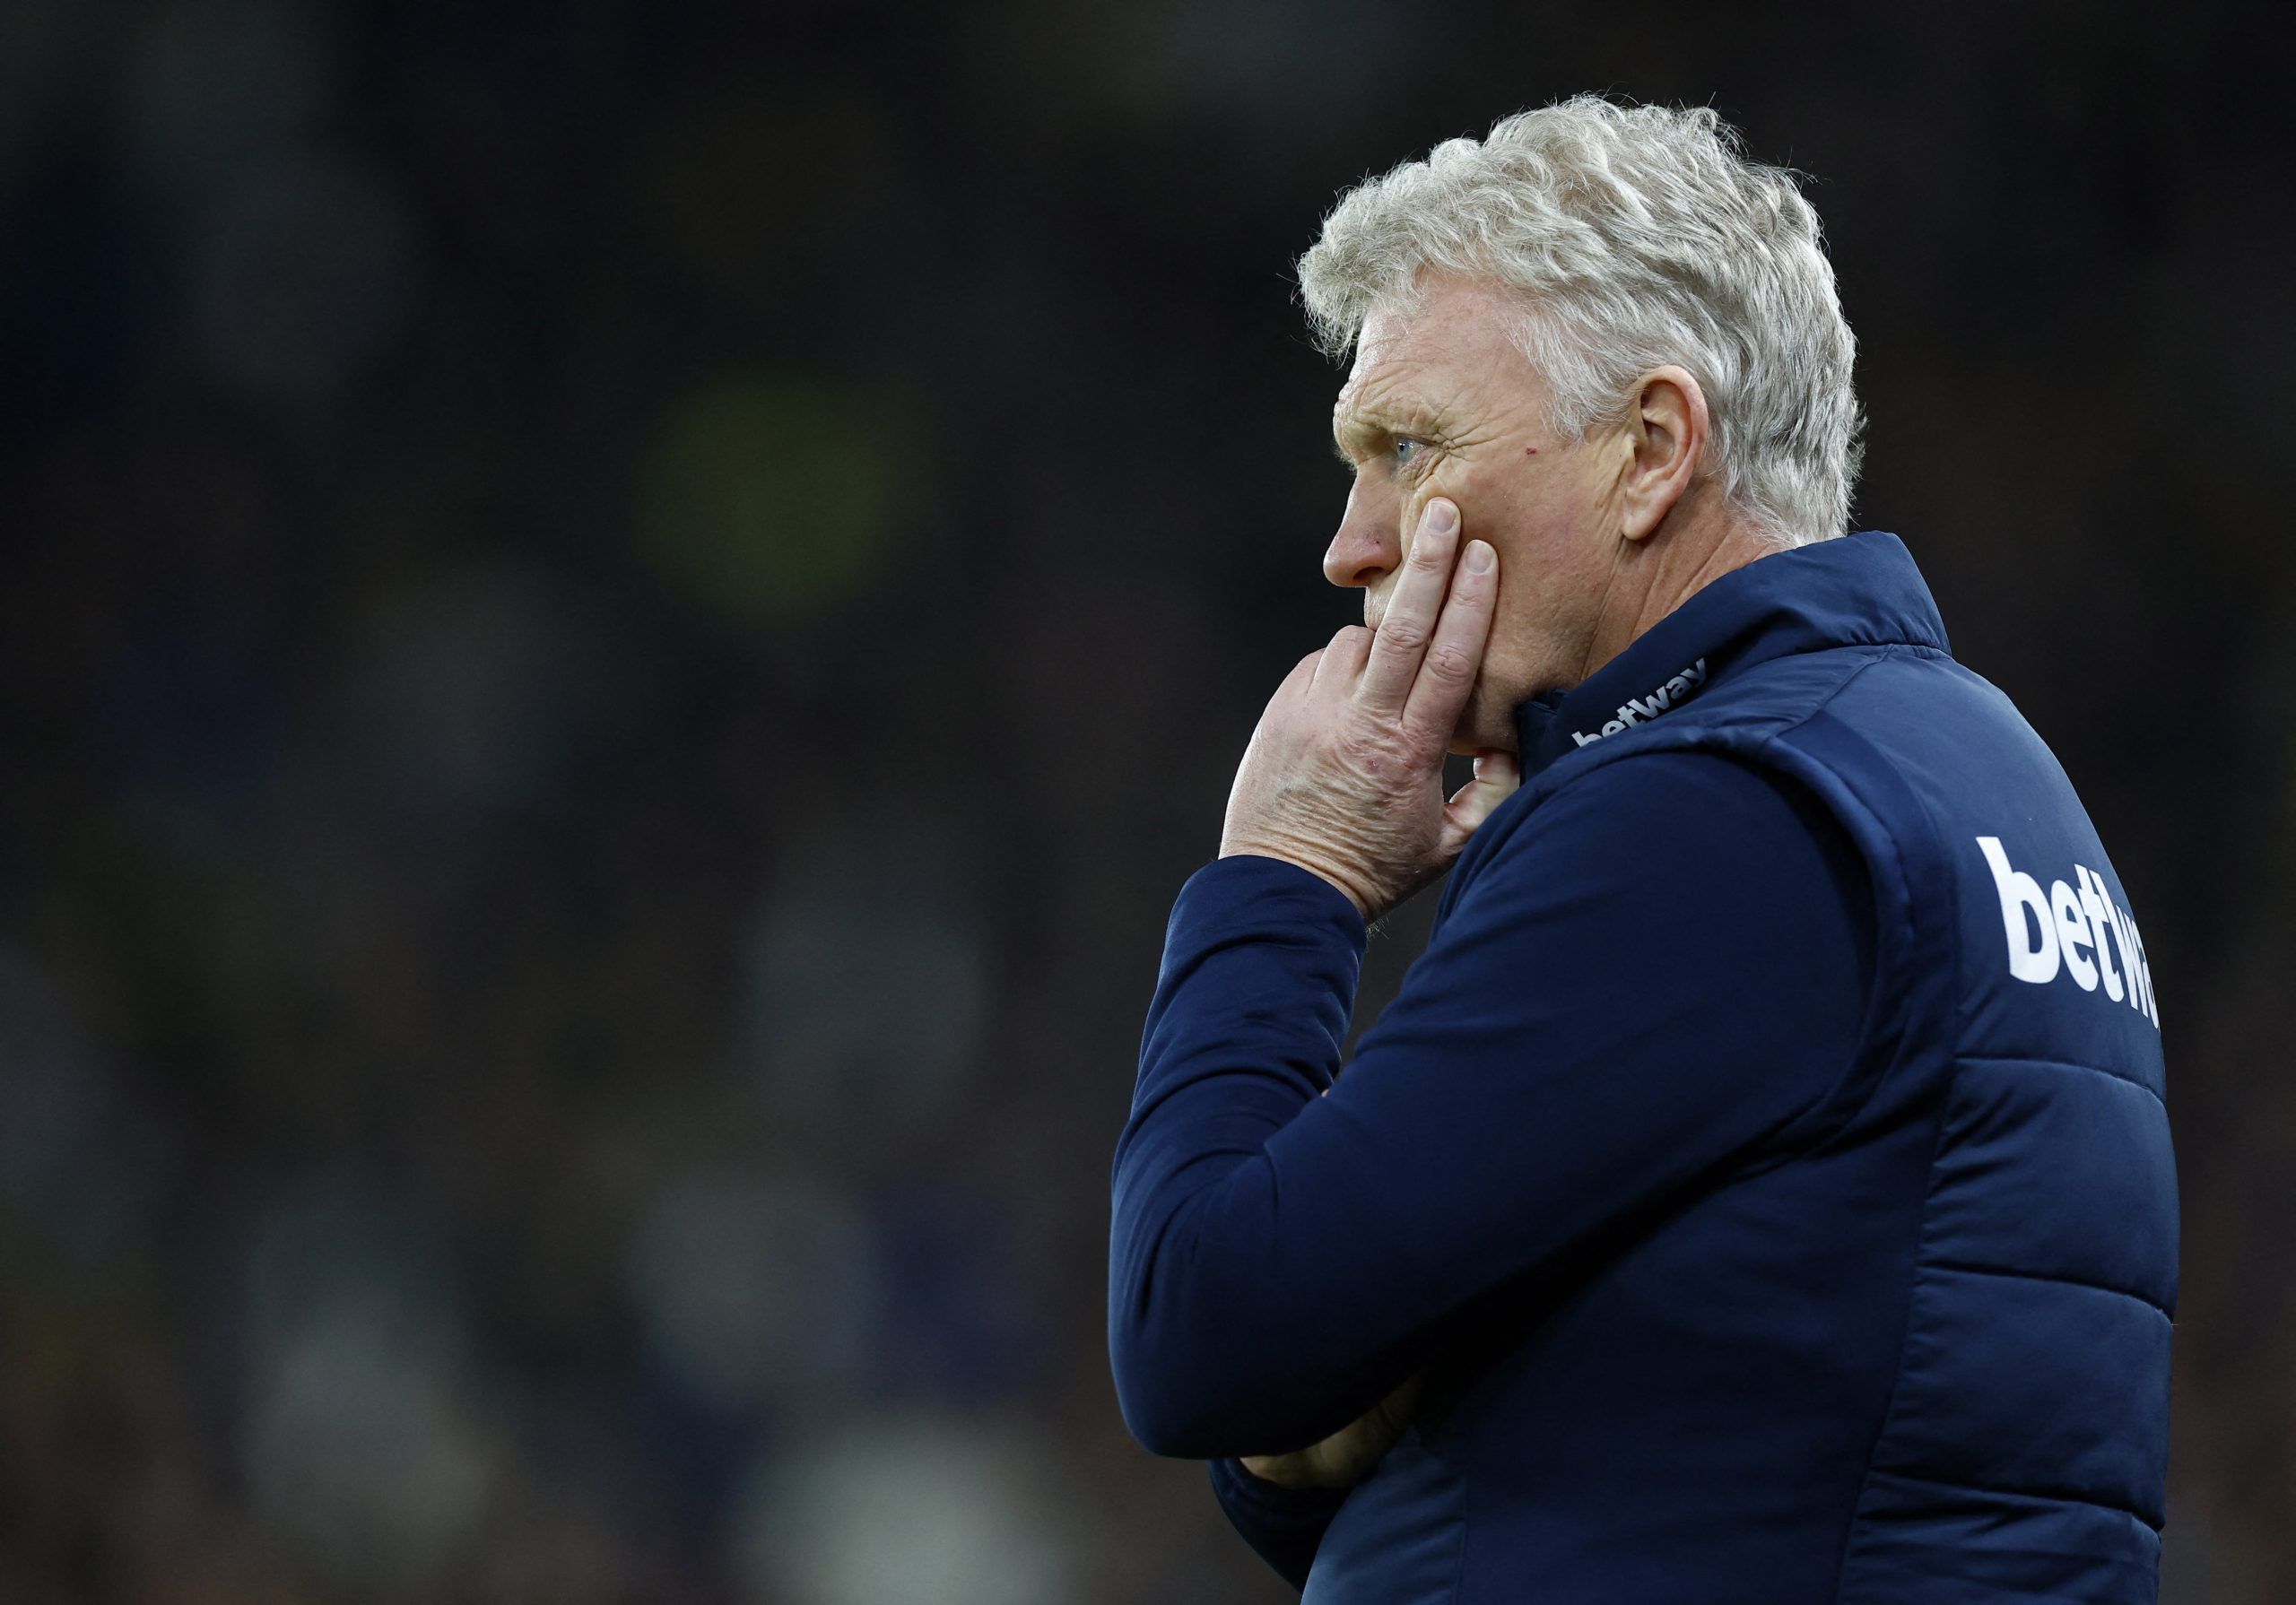 West Ham United manager David Moyes concentrating on match